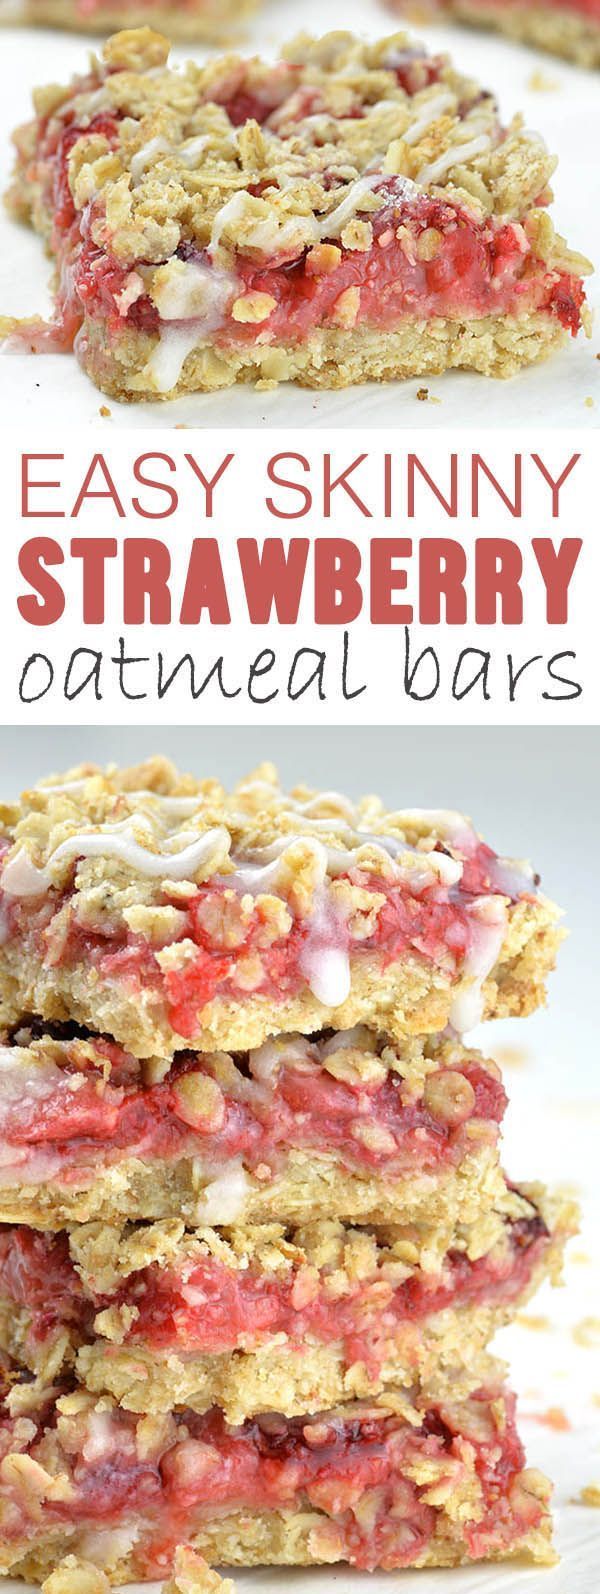 Easy Skinny Strawberry Oatmeal Bars is super simple, one-bowl and no-mixer recipe for healthy dessert, kid-friendly snack or